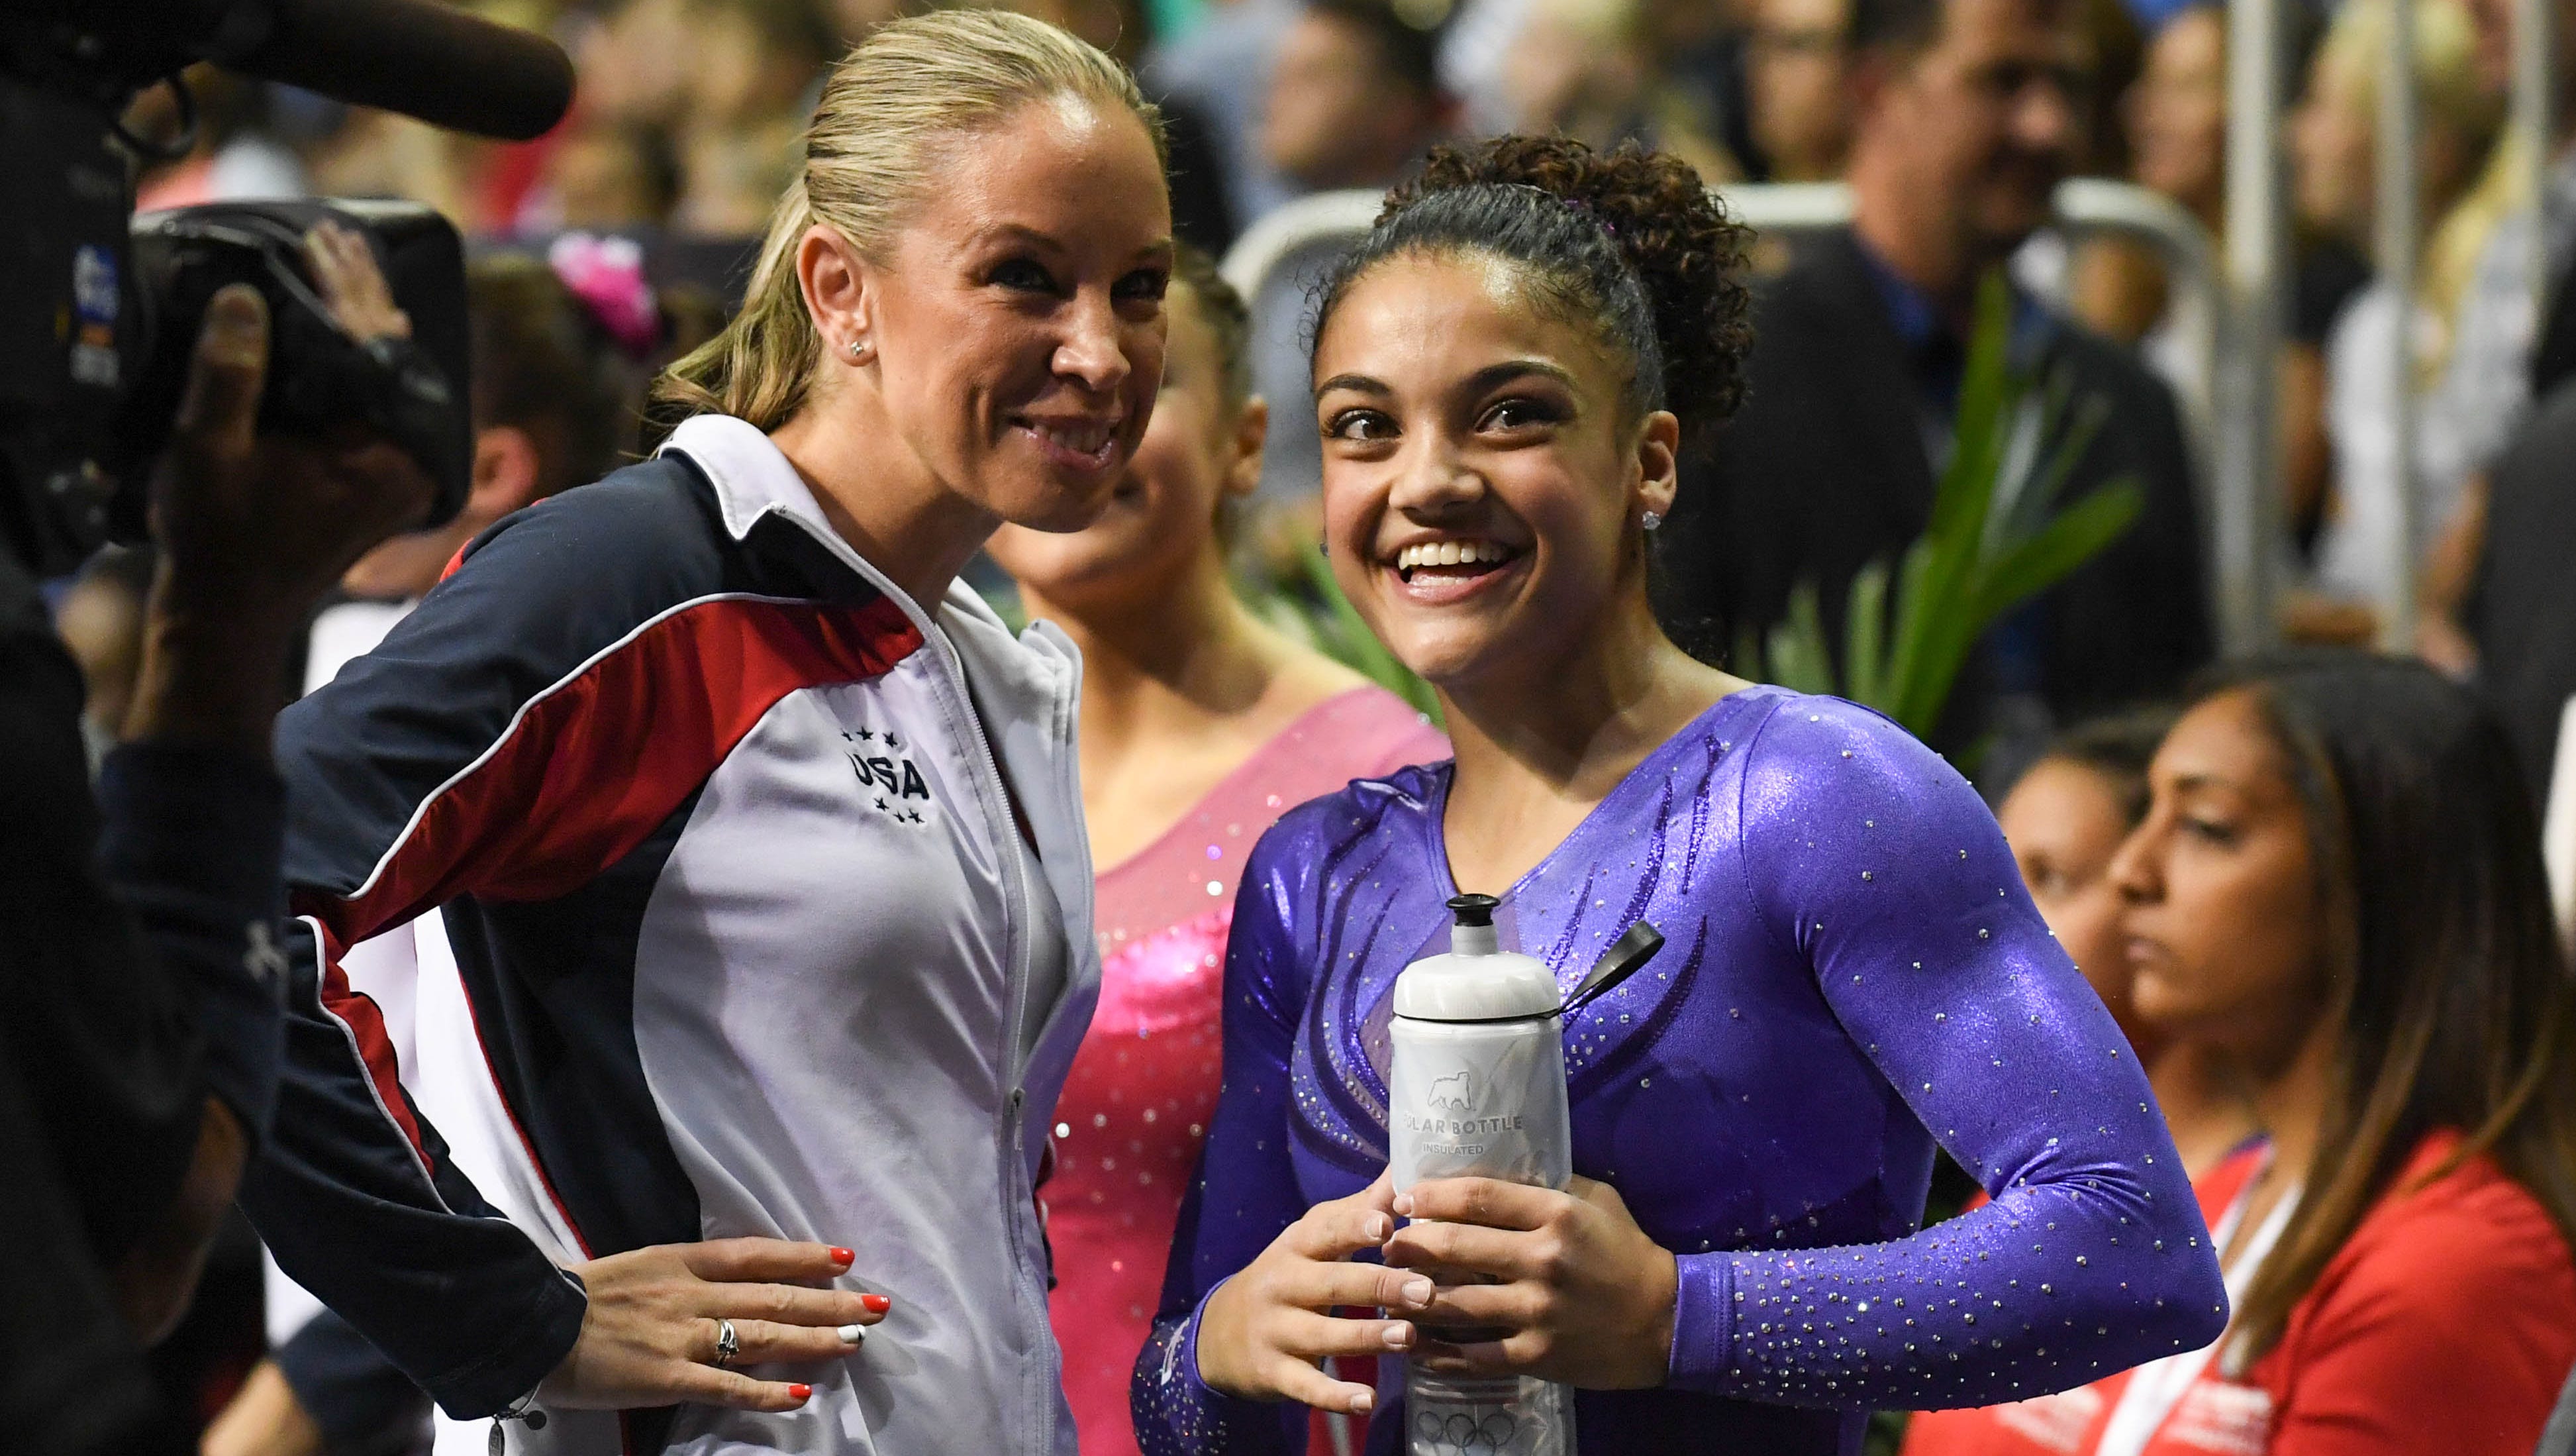 Armour: Shawn Johnson goes from idol to friend for Laurie Hernandez